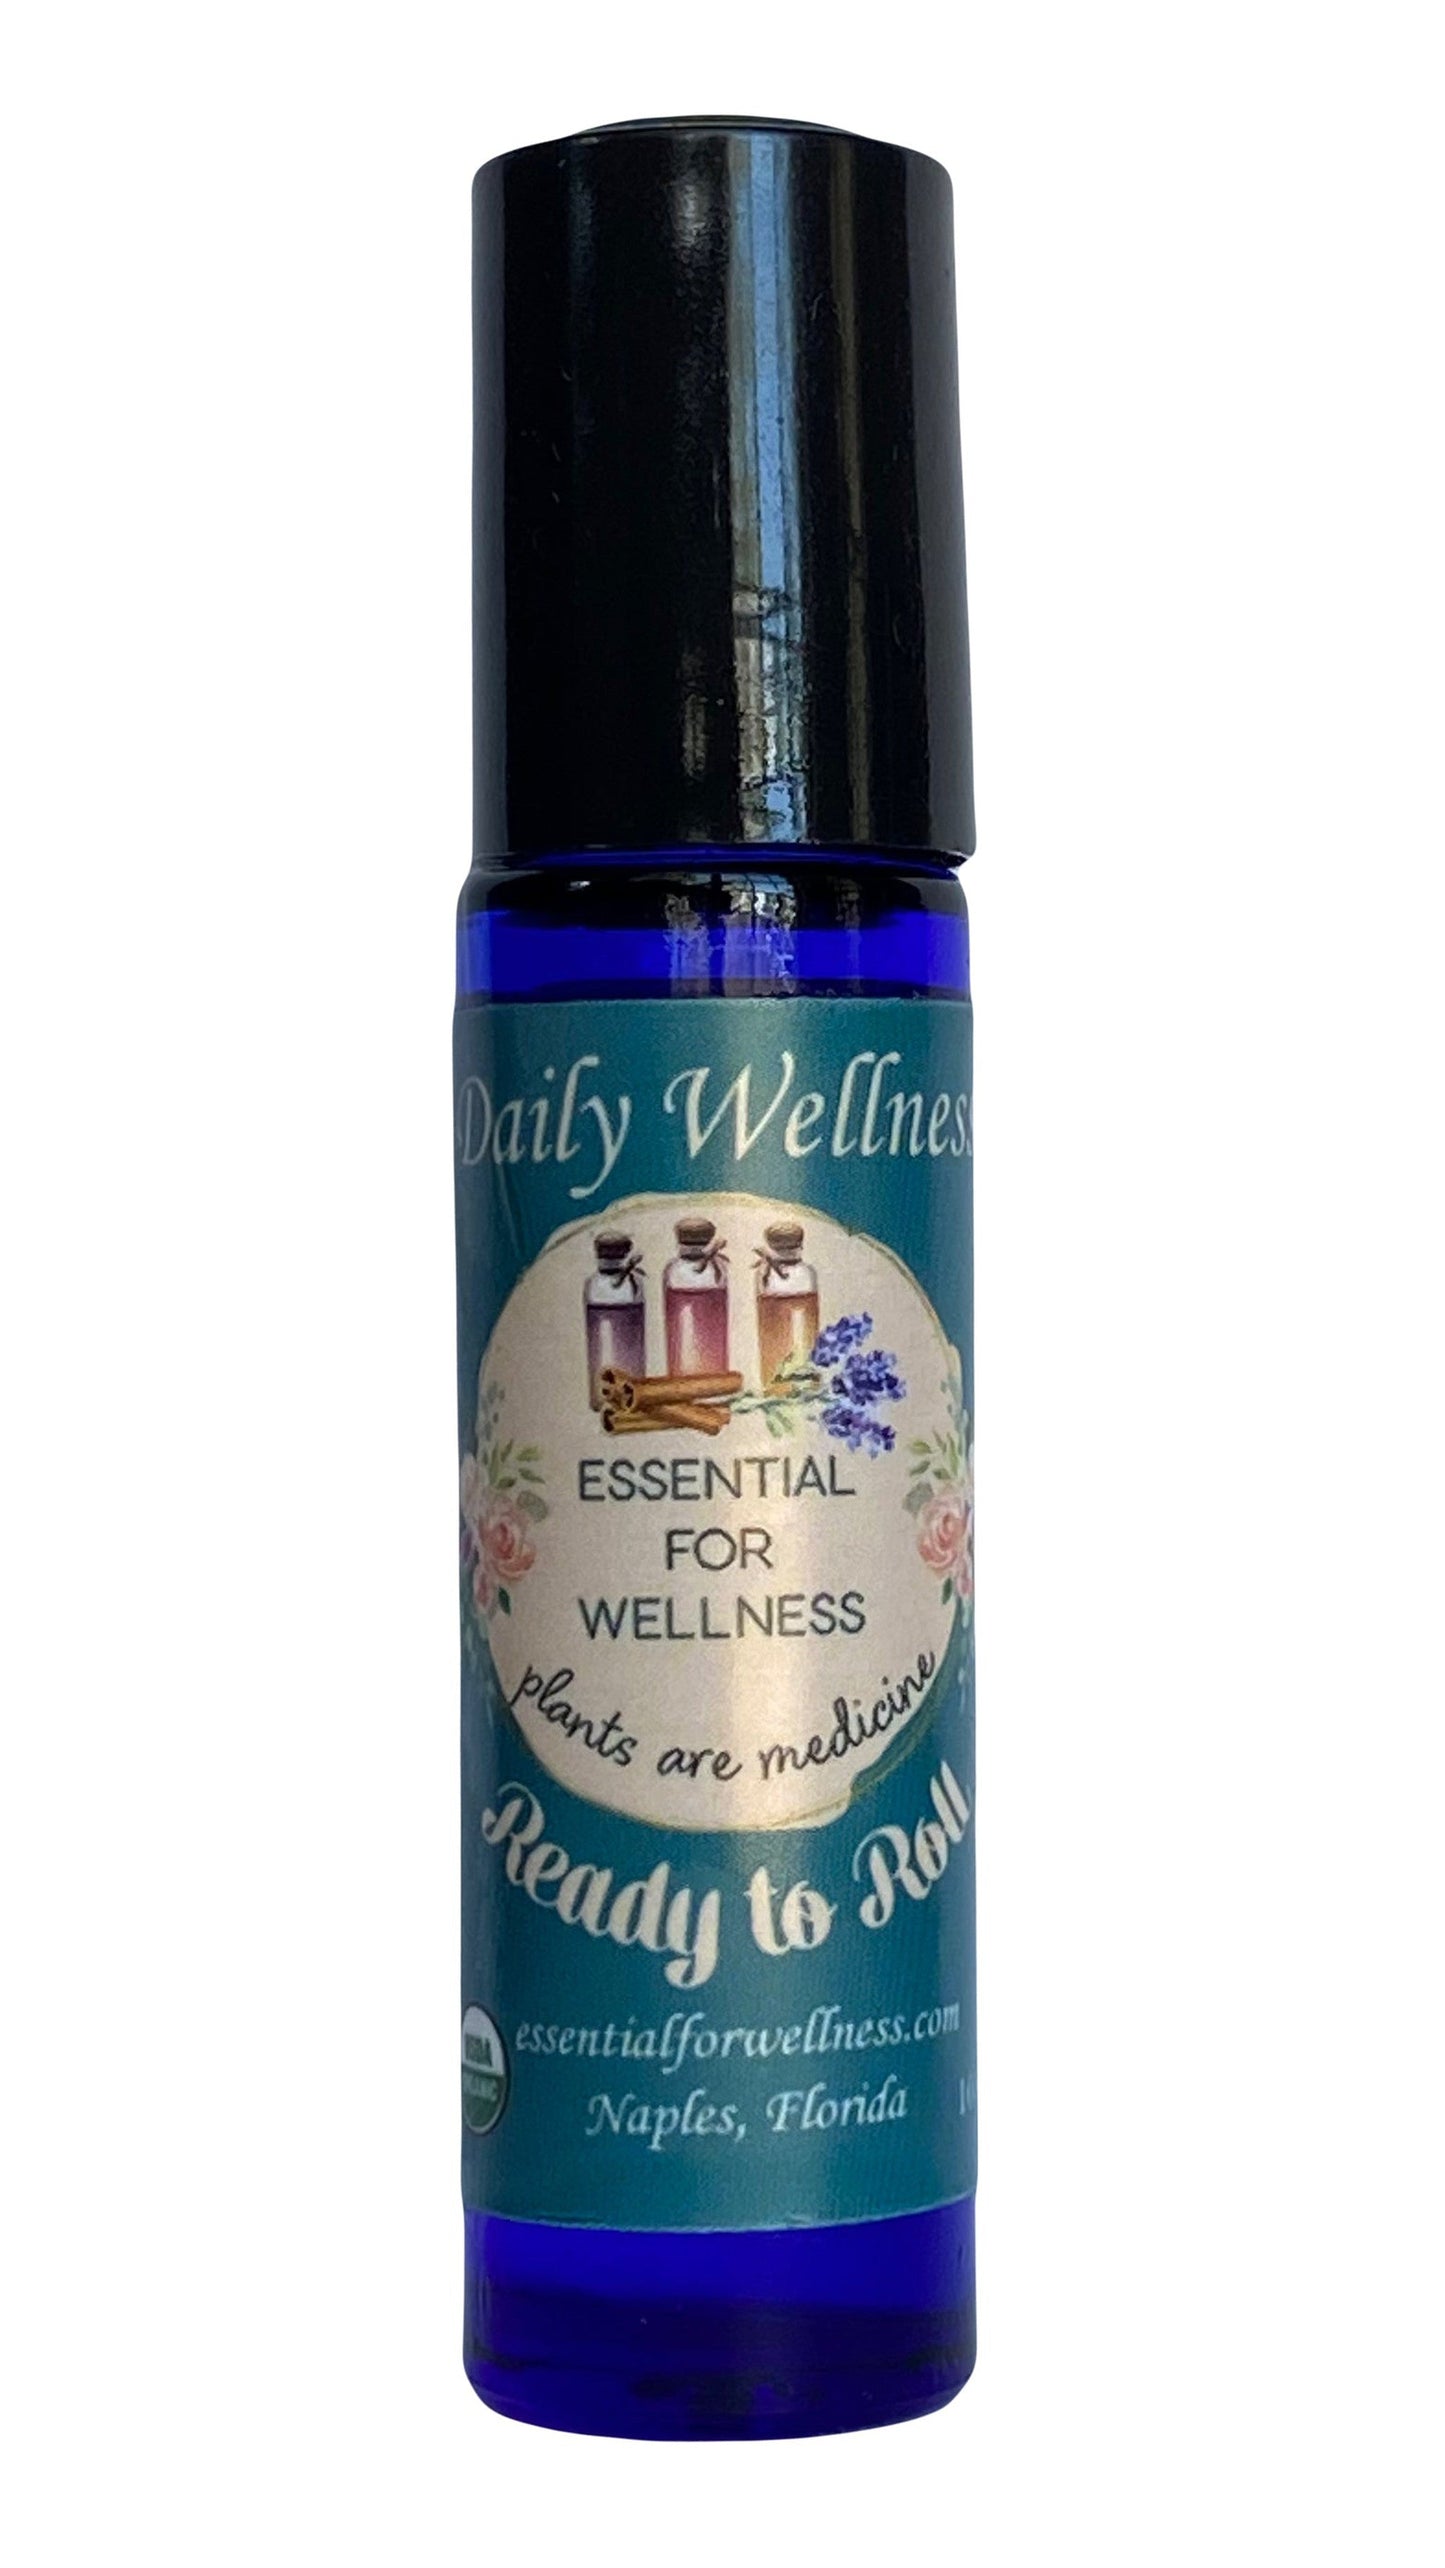 Ready to Roll® Daily Wellness Organic Essential Oil Blends